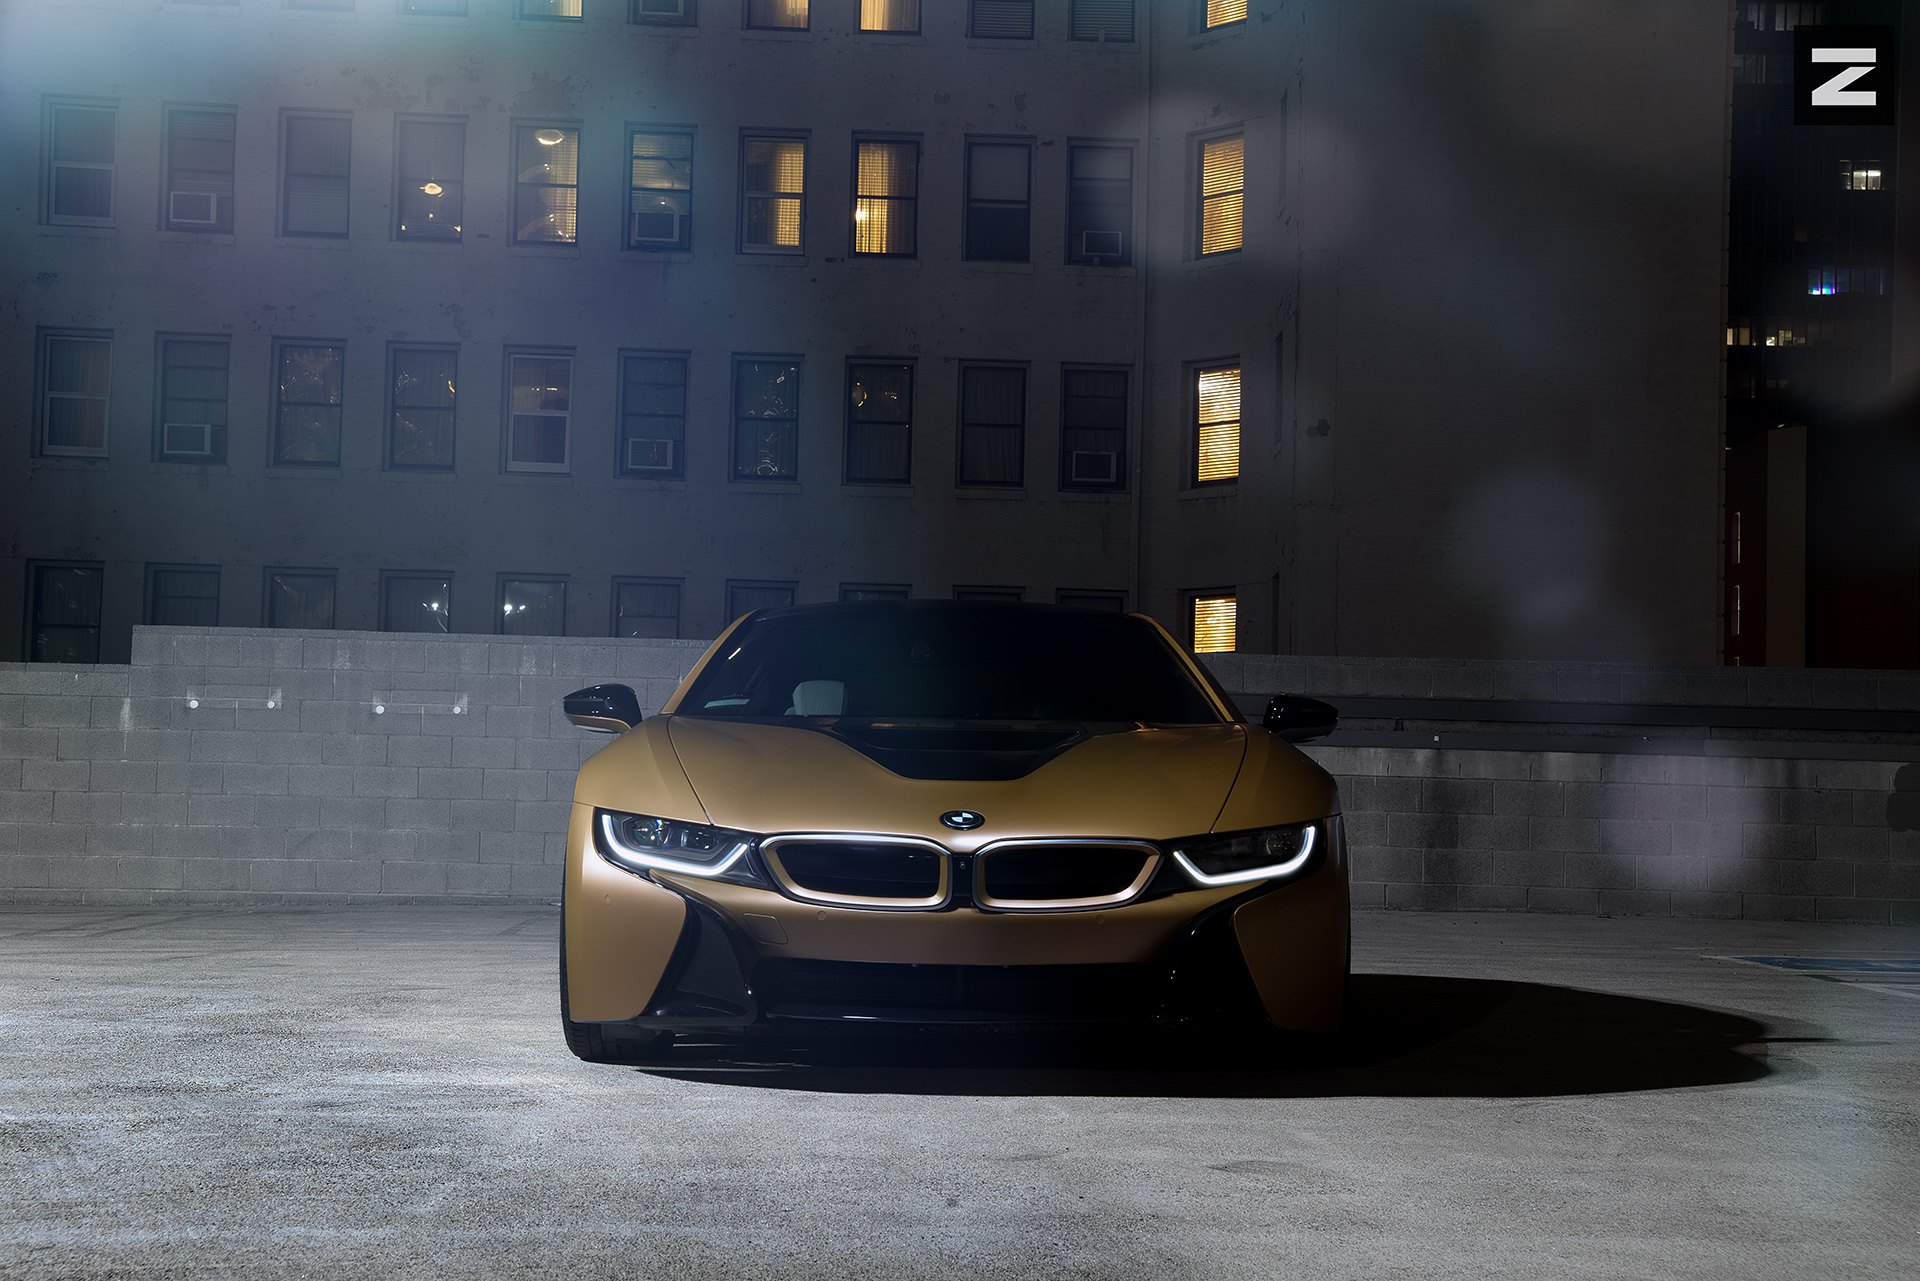 Aftermarket Front Bumper on Bronze BMW i8 - Photo by Zito Wheels